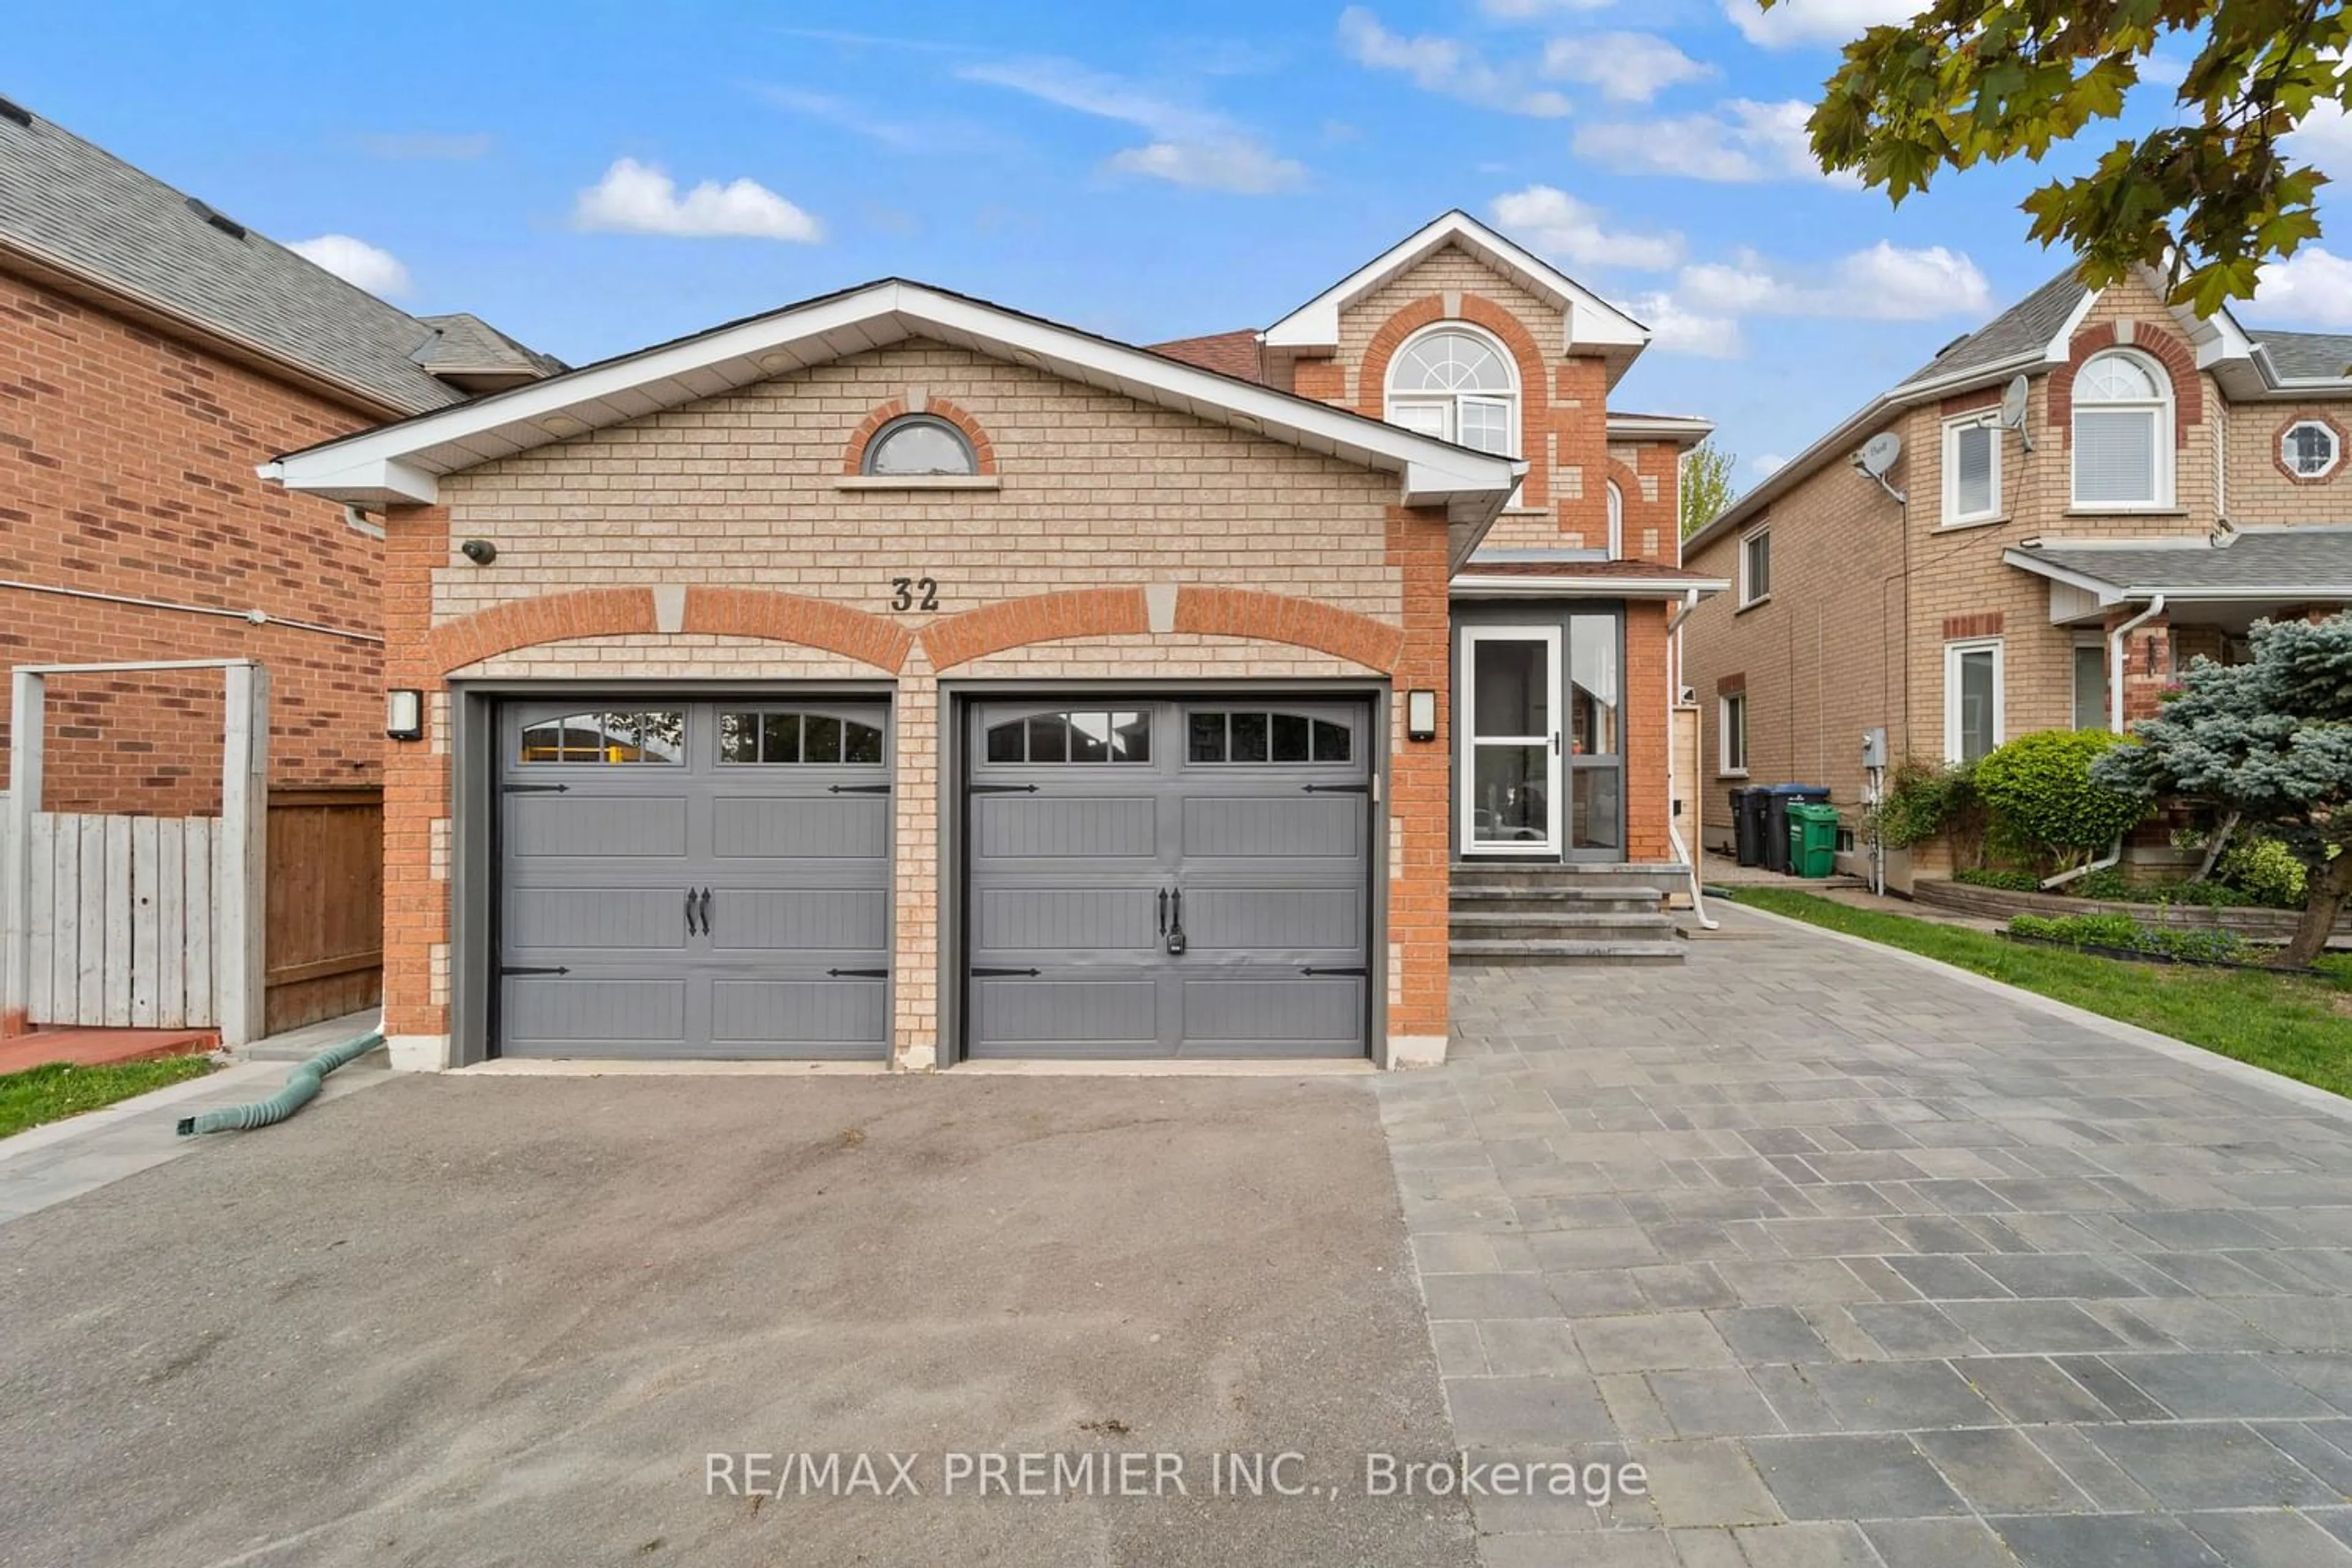 Home with brick exterior material for 32 Sterritt Dr, Brampton Ontario L6Y 5E4